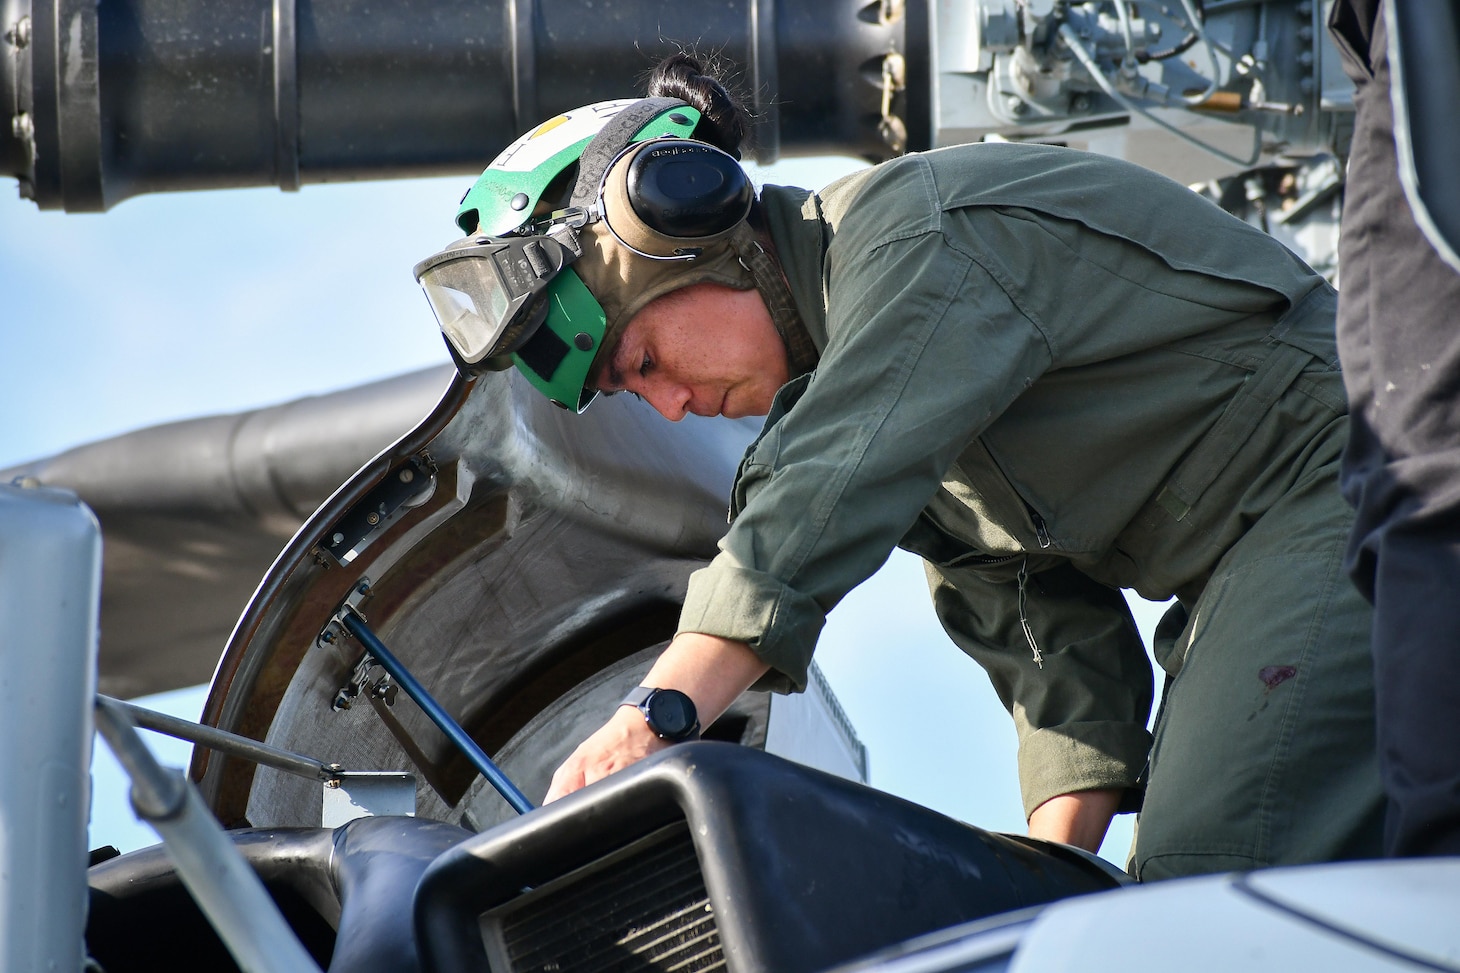 Maj. Brittany Fayos, Rotary Wing Division deputy and CH-53 pilot at Fleet Readiness Center East (FRCE), conducts a functional check flight inspection prior to the delivery of a recently overhauled CH-53 helicopter to the fleet.